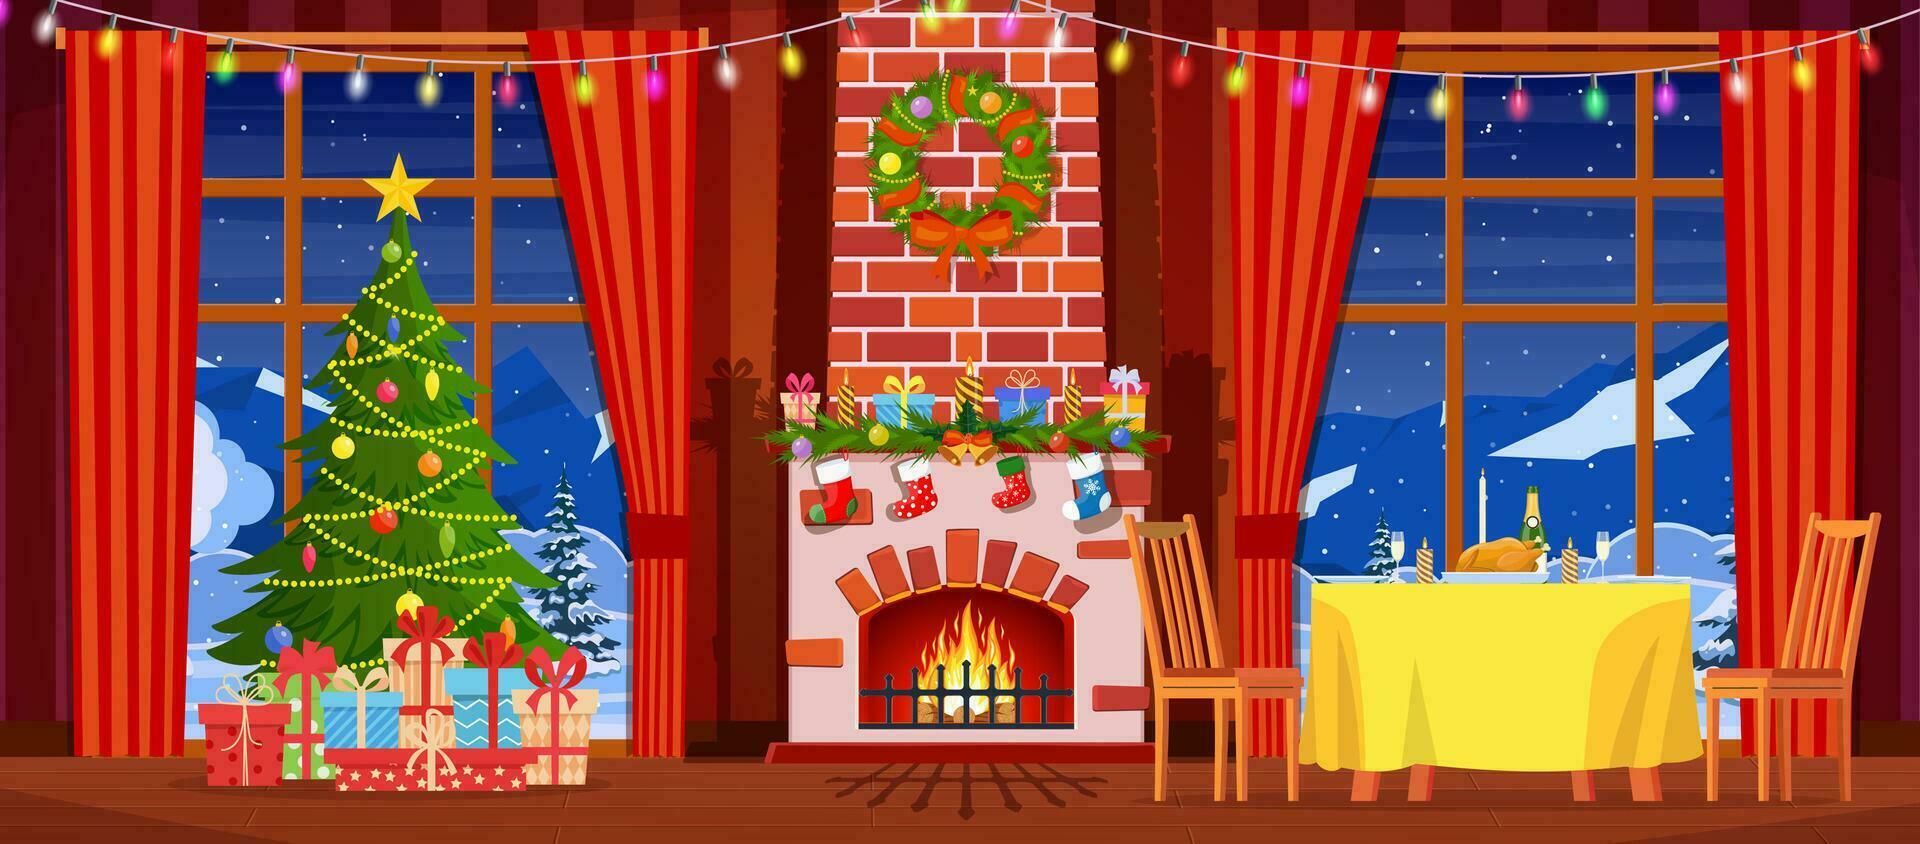 Festive interior of living room, new year. Christmas tree, gifts above fireplace for new year, festive table, fireplace, Christmas wreath, decorations. Cartoon Flat Vector Illustration